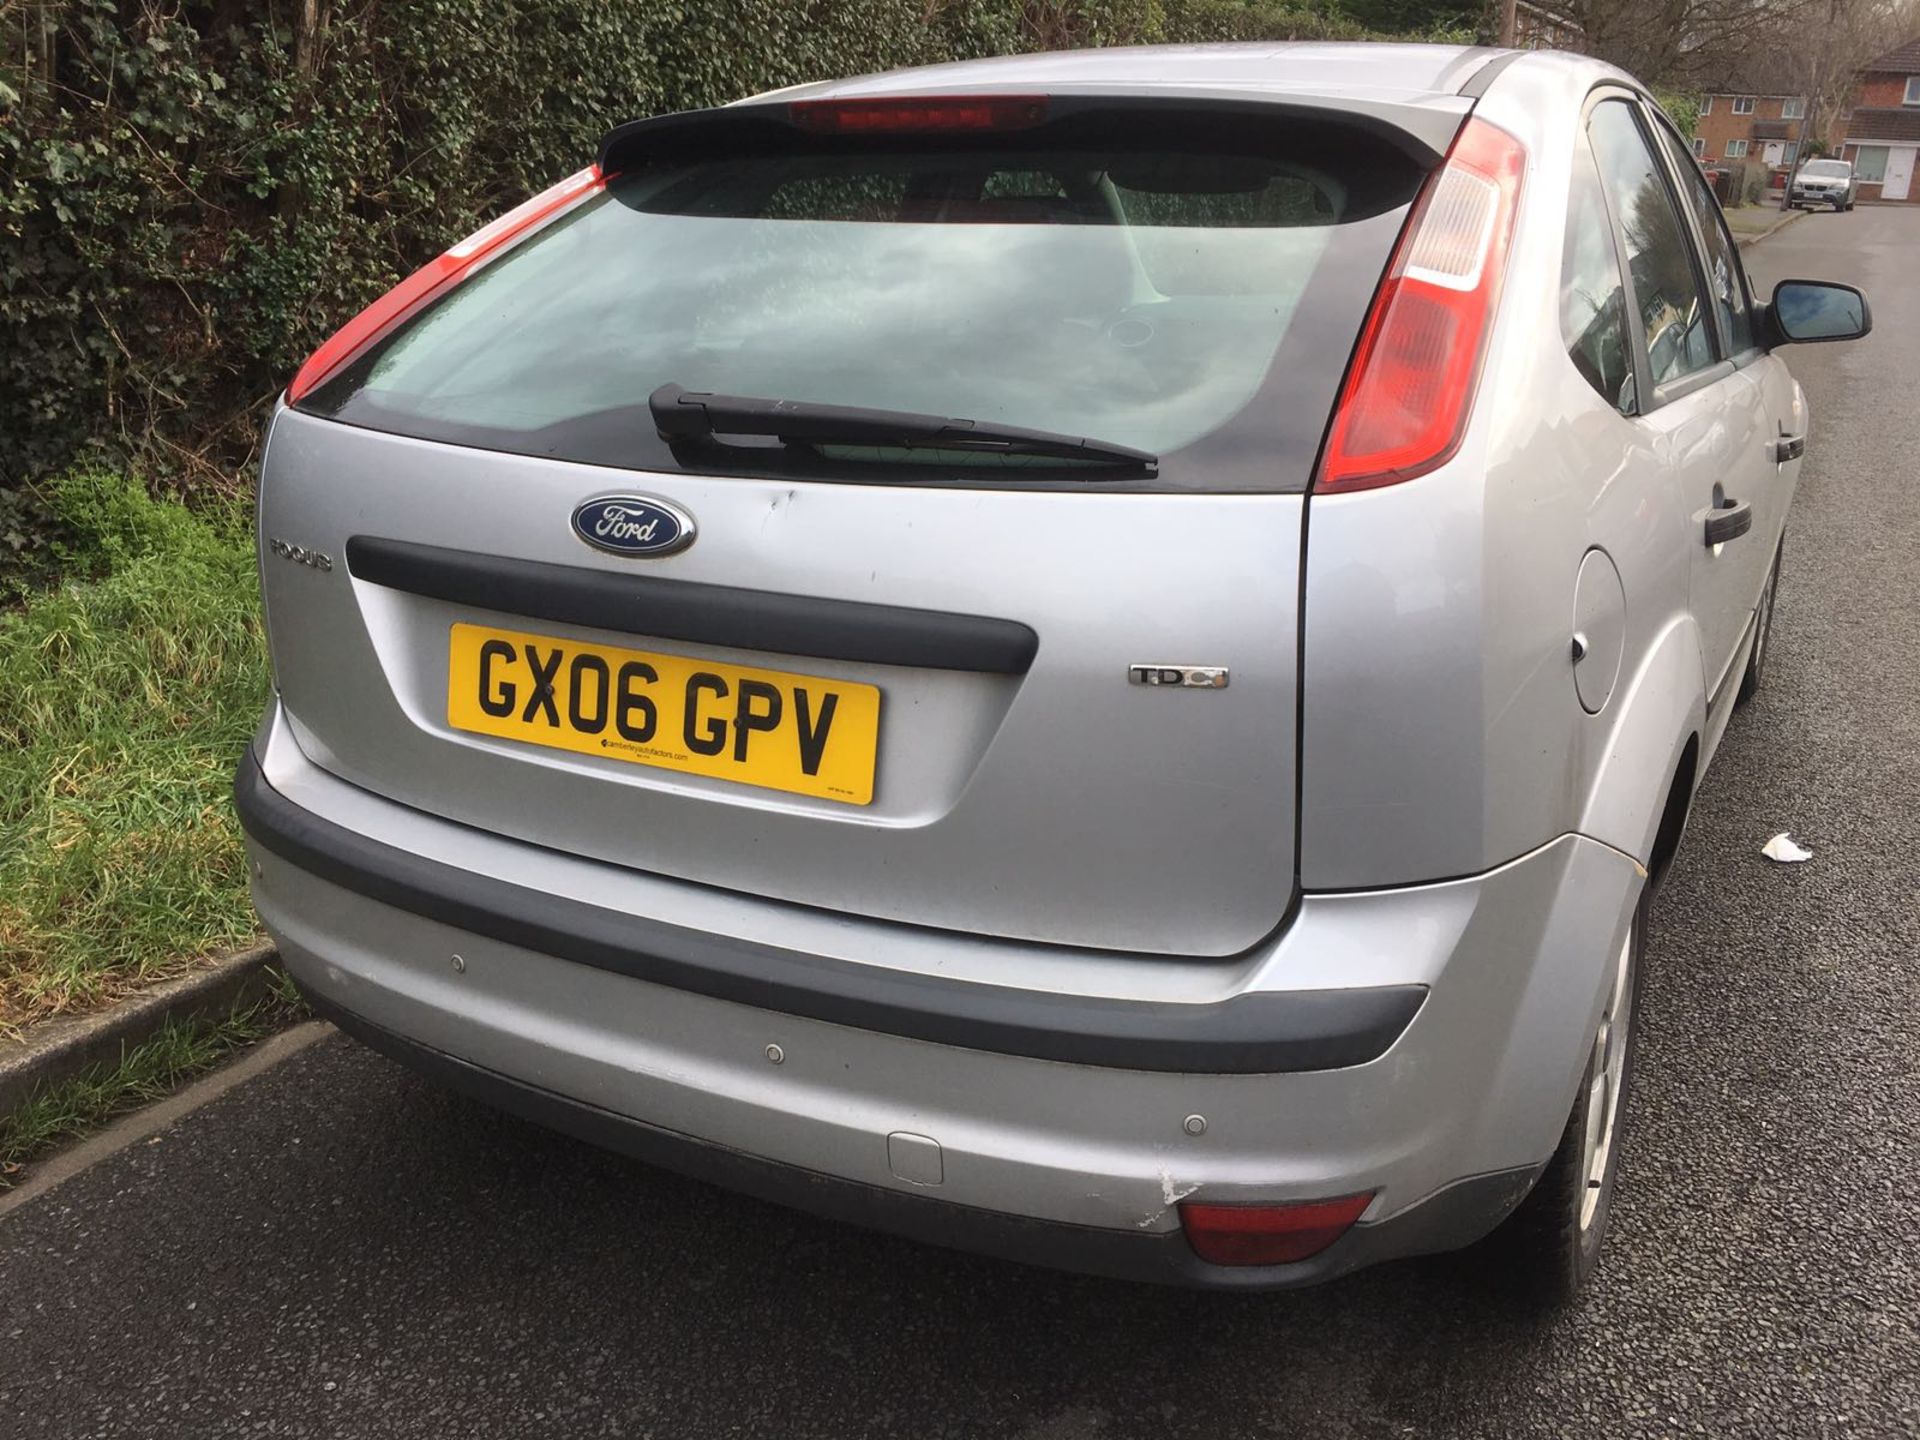 Ford Focus 1.6 TDCI - Image 8 of 11